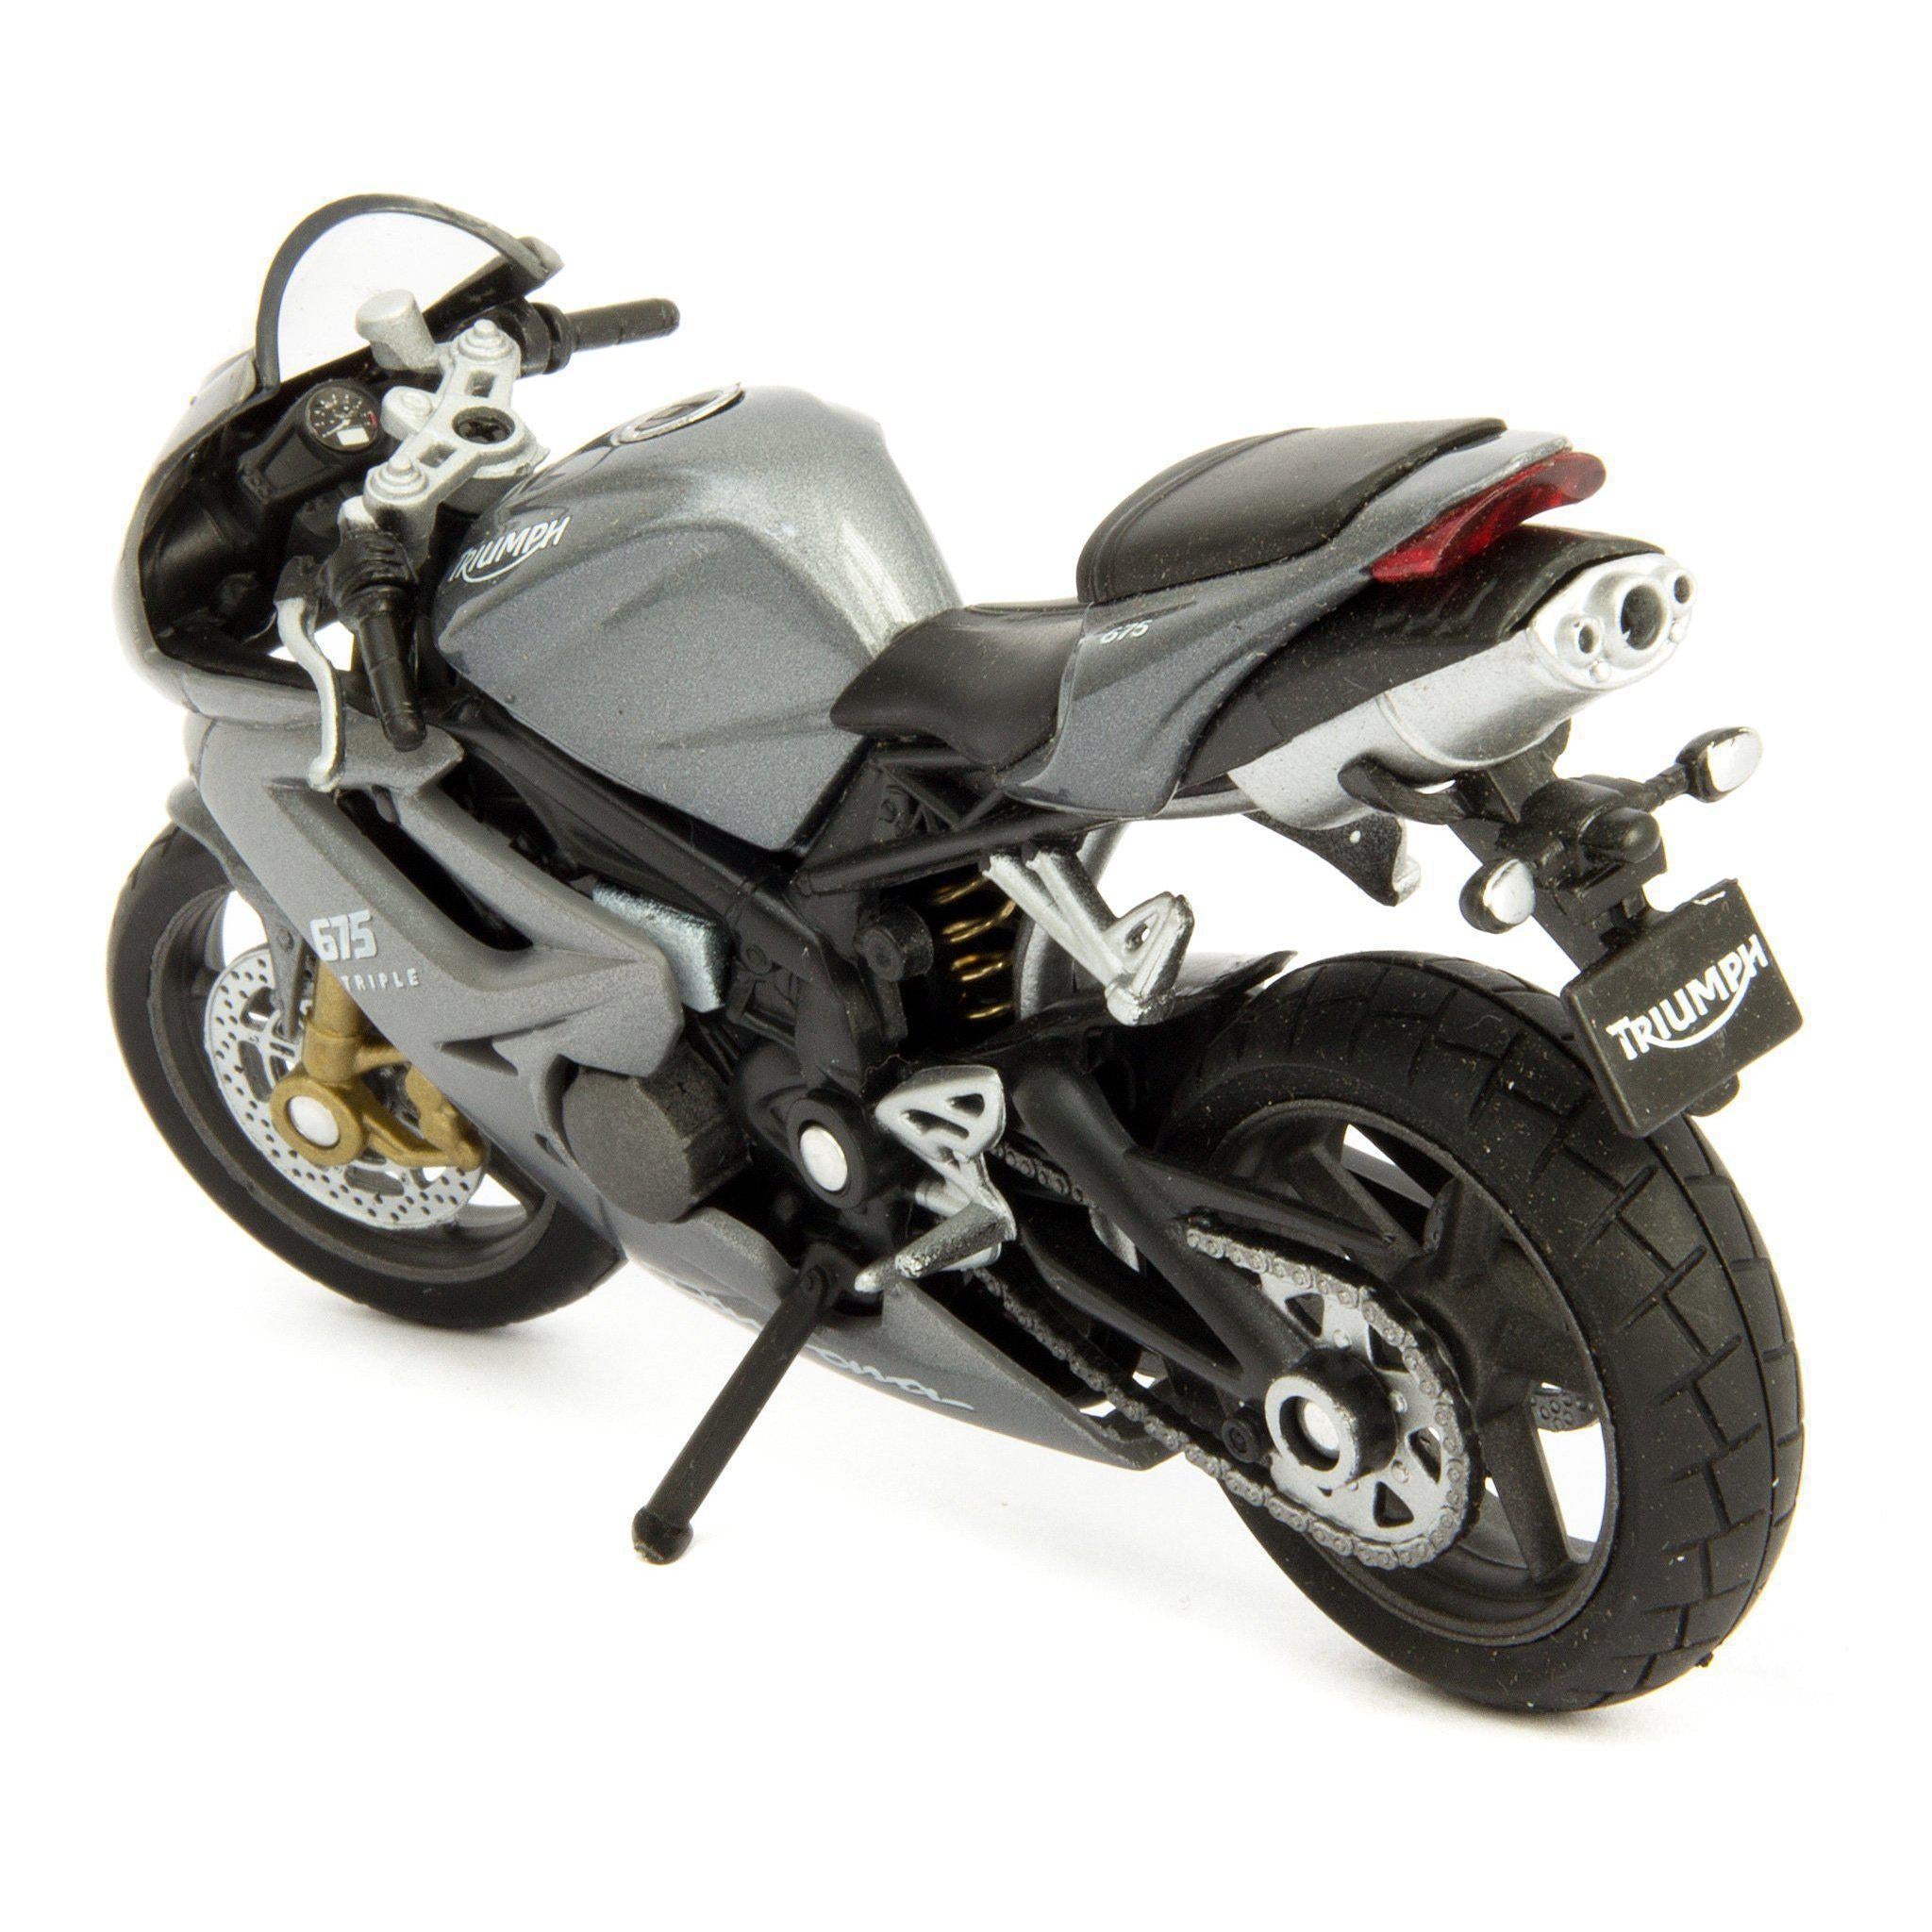 Triumph Daytona 675 Diecast Model Motorcycle - 1:18 Scale-Welly-Diecast Model Centre